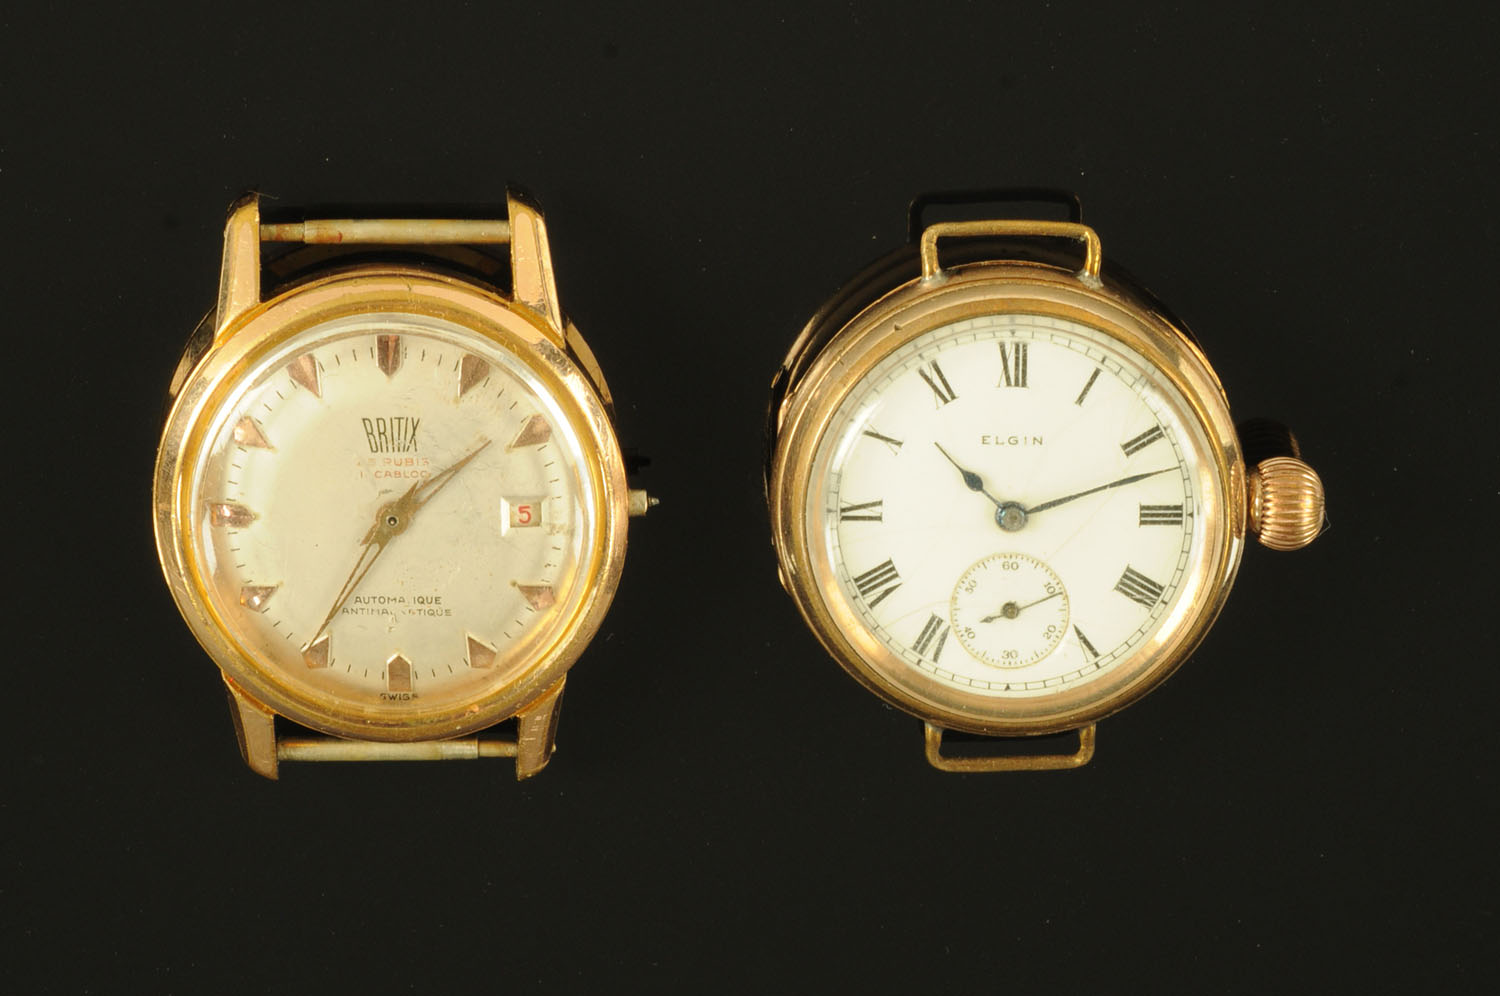 An Elgin fob watch, with gold plated cased, and a Britix gentleman's wristwatch (both A/F).